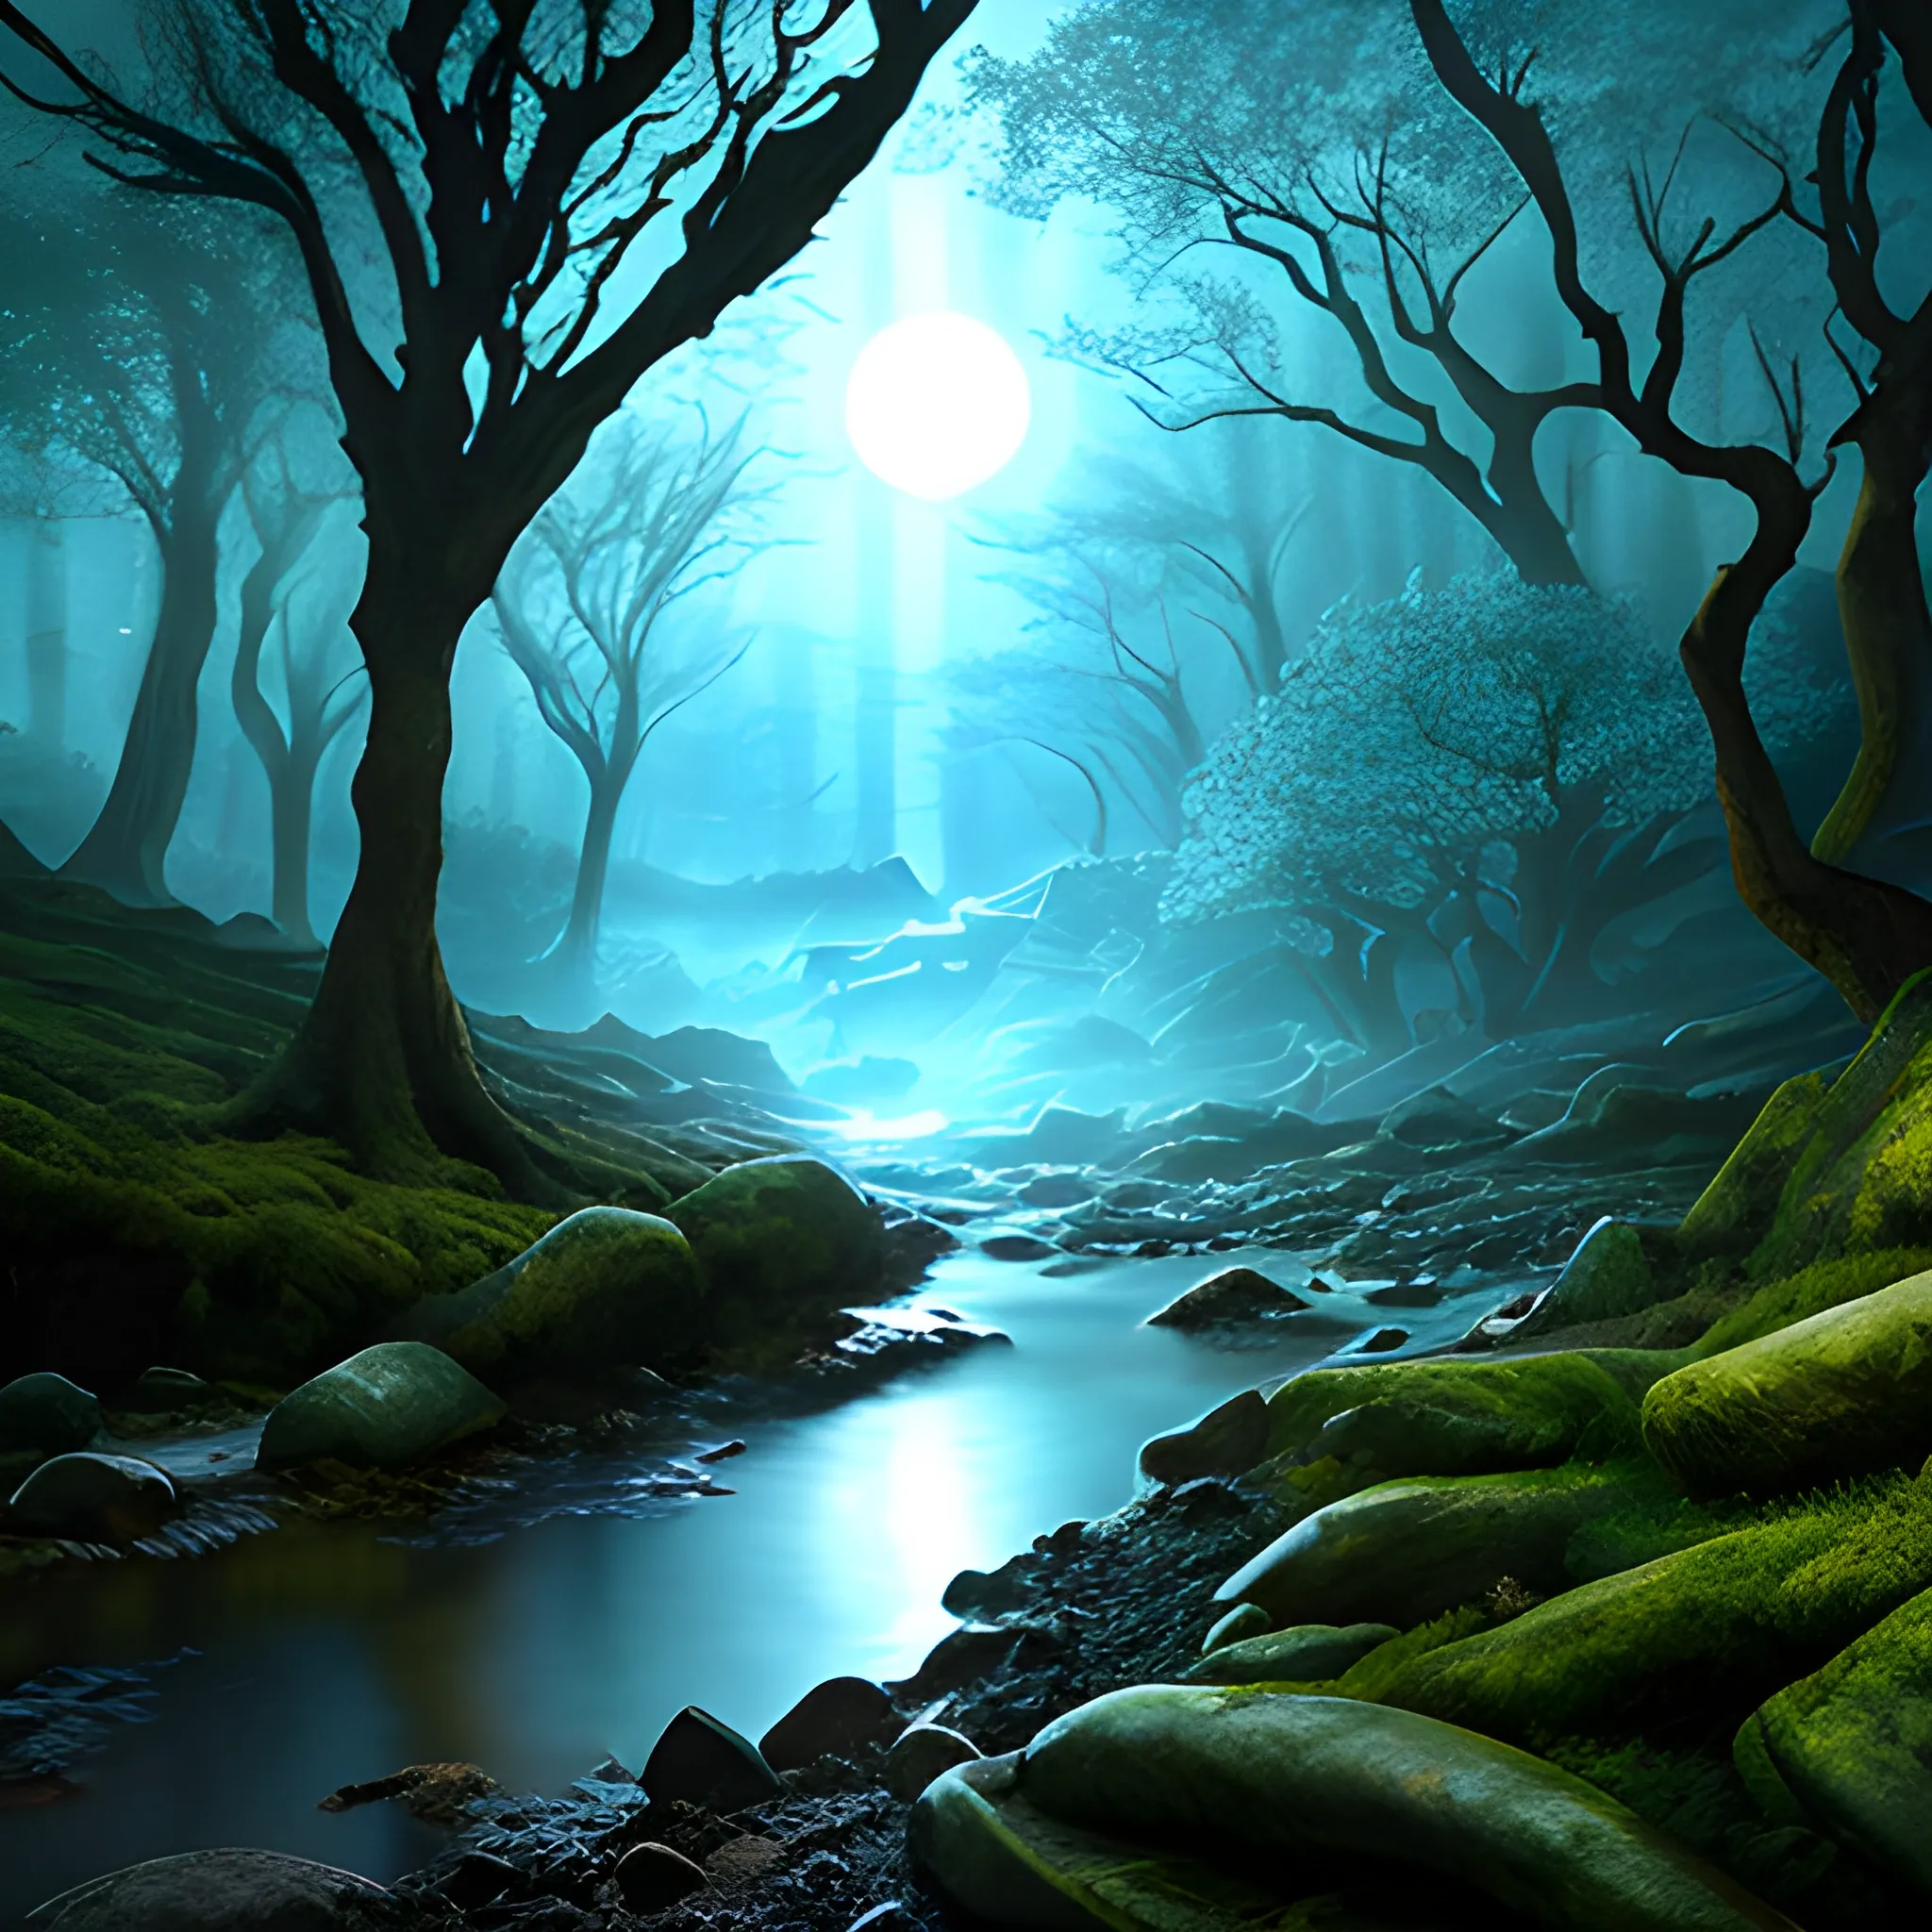 ancient elvish forest with a stream and a small clearing under moonlight